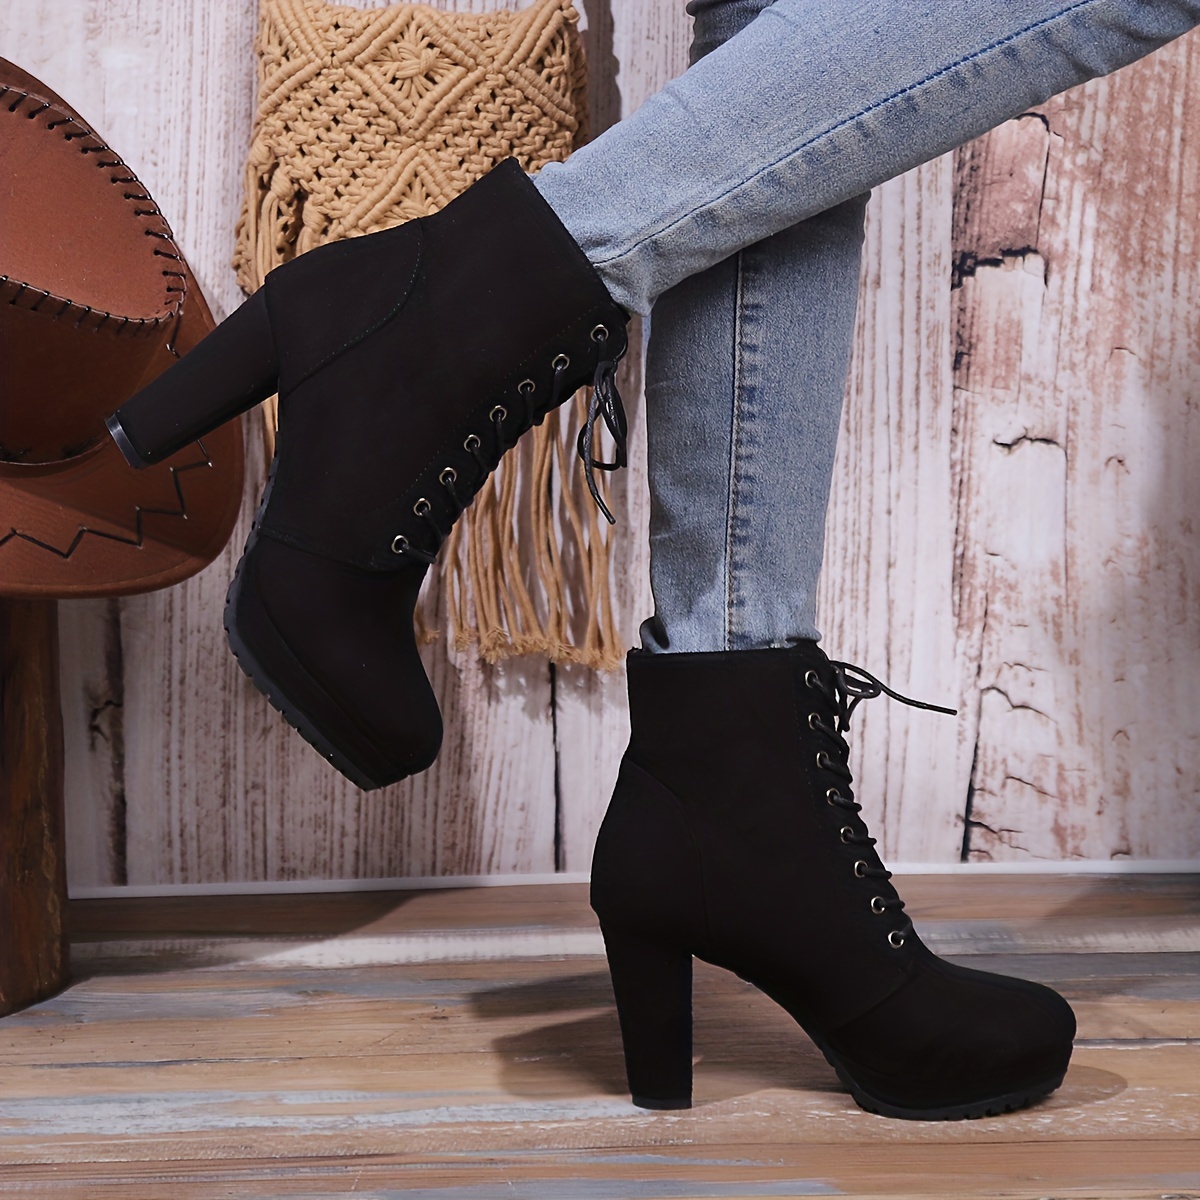 PMUYBHF lace up ankle booties for women ankle boots